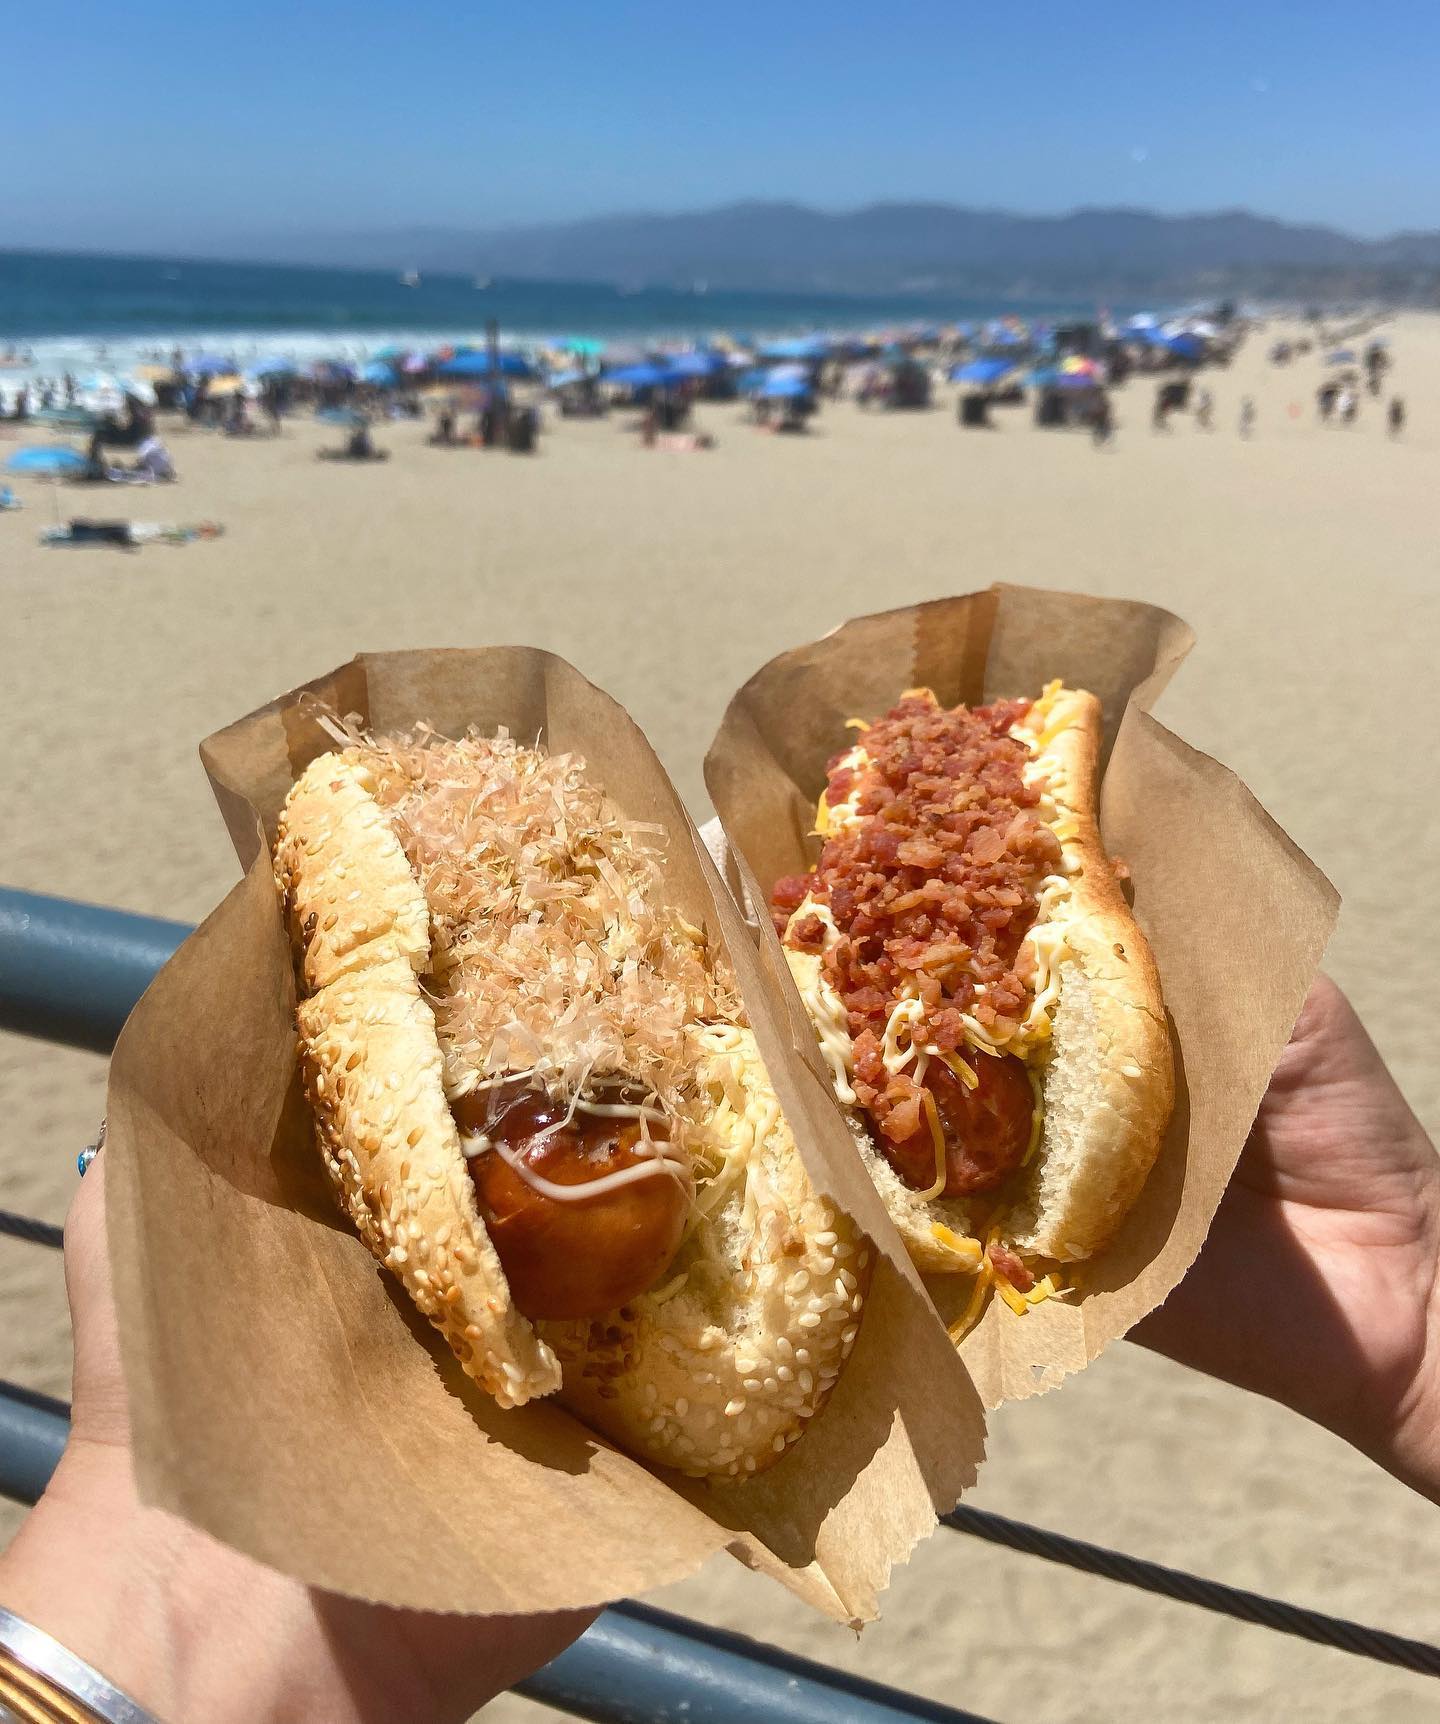 Can’t go wrong with a hot dog, but these were even better because they have a Japanese twist!🗾🌭  Pro Tip: Keep an eye out for seagulls! They WILL try to take your hot dog if you take a picture! 😱⚠️  📸: @fromhannahsplate
.
.
.
#foodie #foodies #foodiegram #foodielife #foodiesofinstagram #foodstagram #hotdog #hotdogs #hotdoglovers #Japadog #santamonica #santamonicapier #santamonicapierfood #pacpark #pacificpark #beachburger #LAdog #seafood #seagull #birdthieves